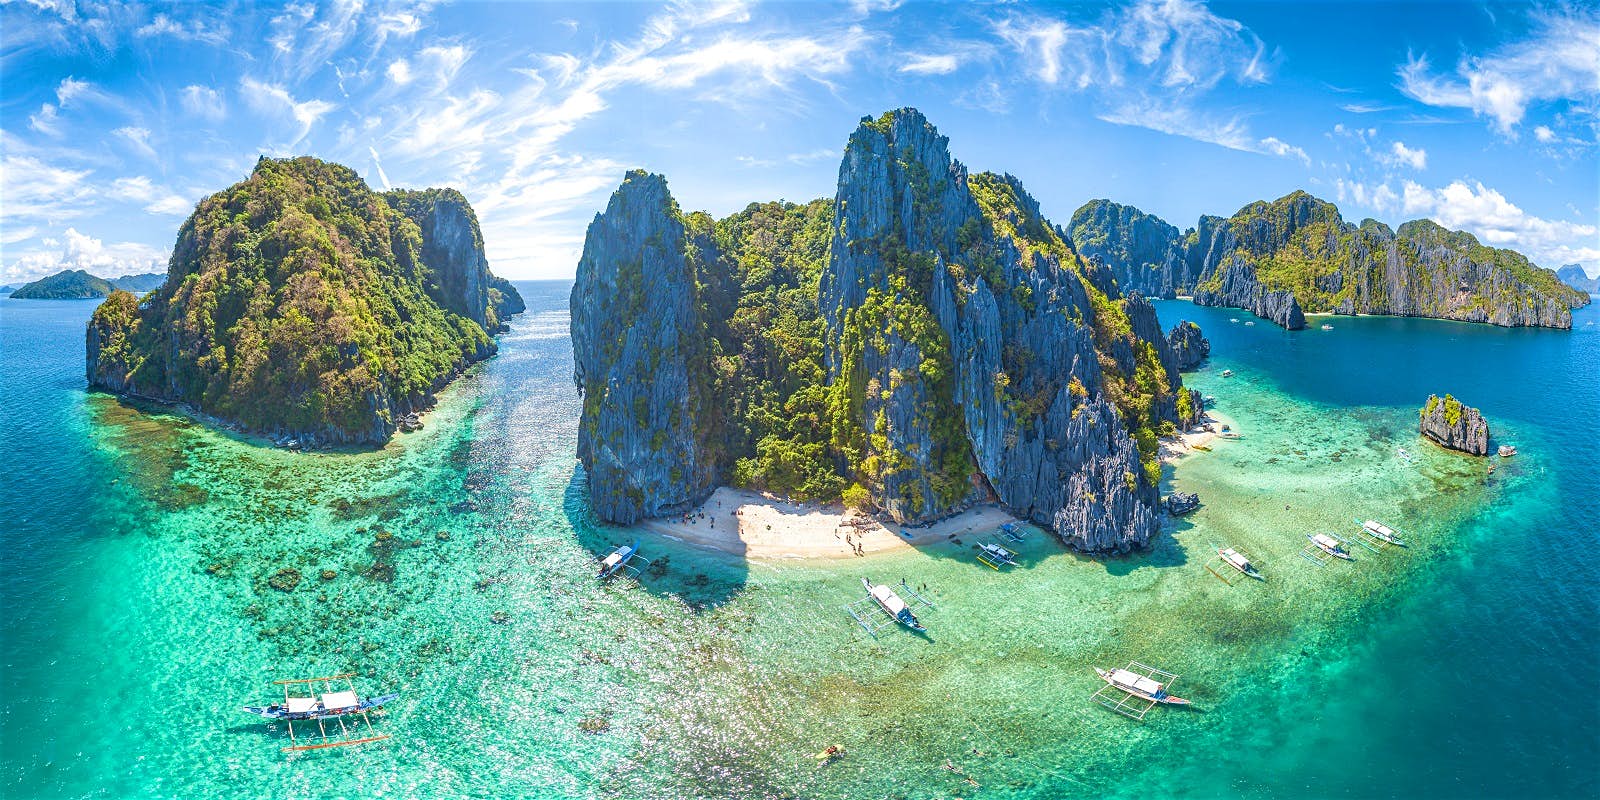 It’s That Easy — Score Big on This 30-Question ‘Round the World Quiz to Win Philippines islands